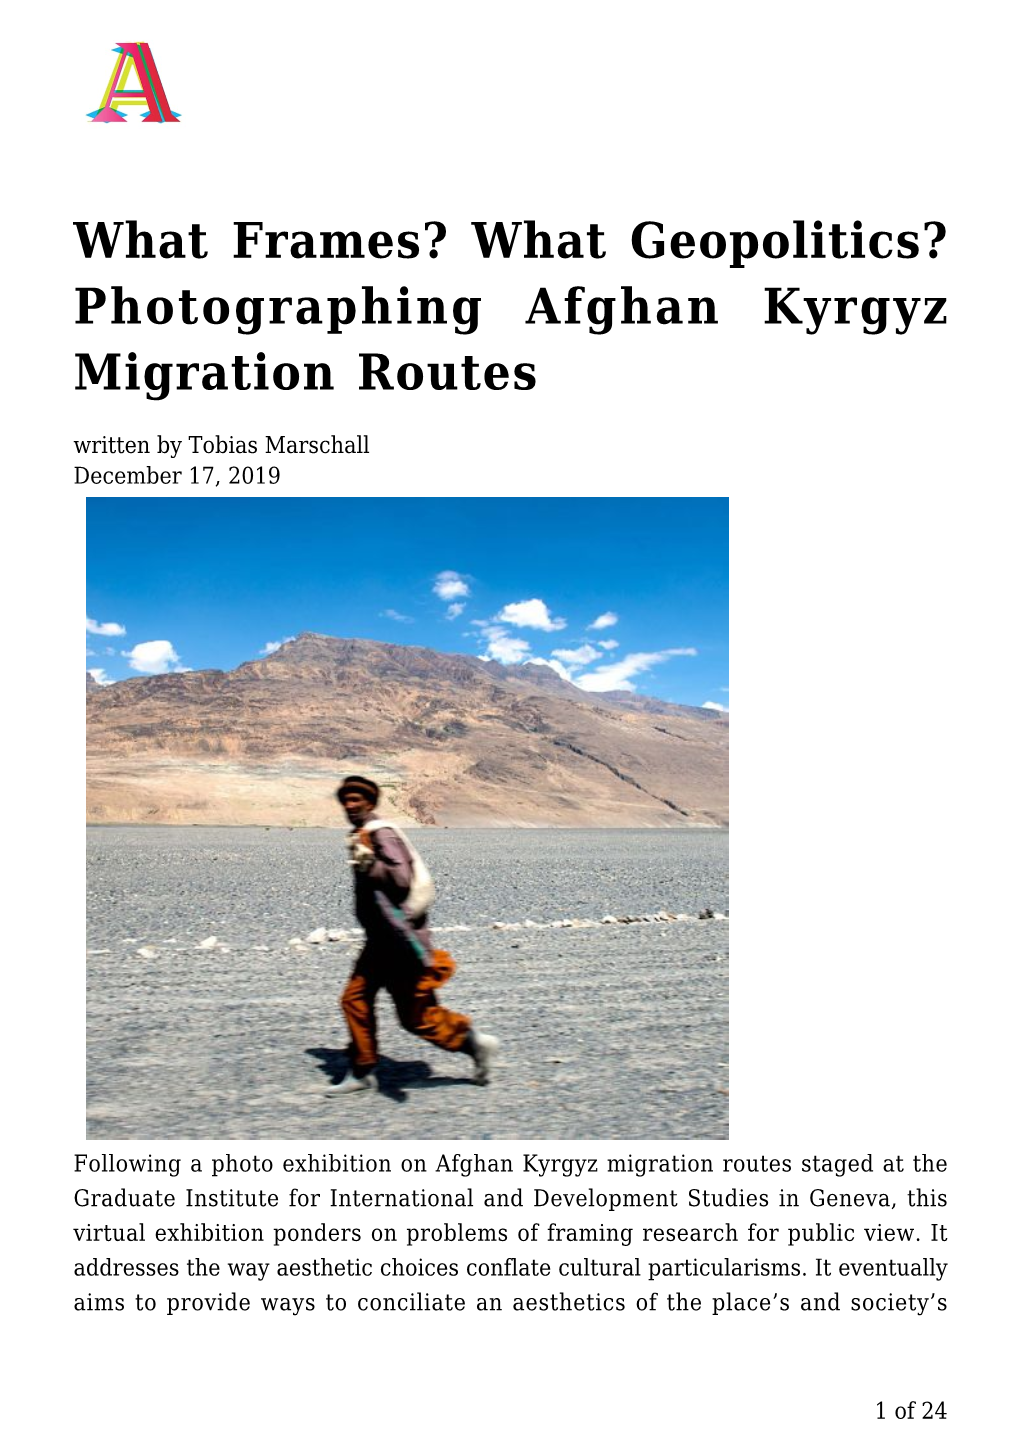 What Geopolitics? Photographing Afghan Kyrgyz Migration Routes Written by Tobias Marschall December 17, 2019